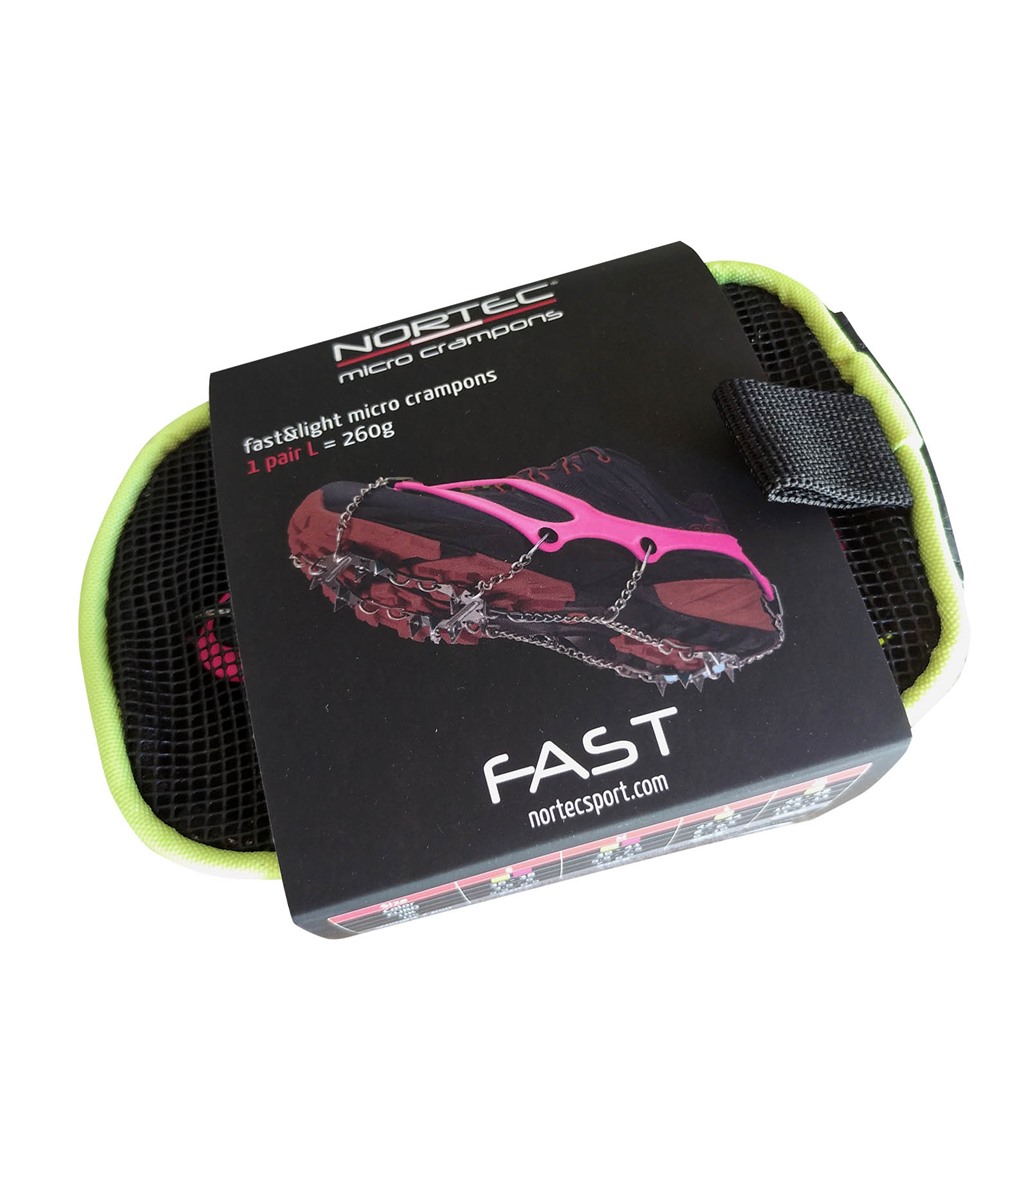 RAMPONCINI DONNA FAST PINK NORTEC